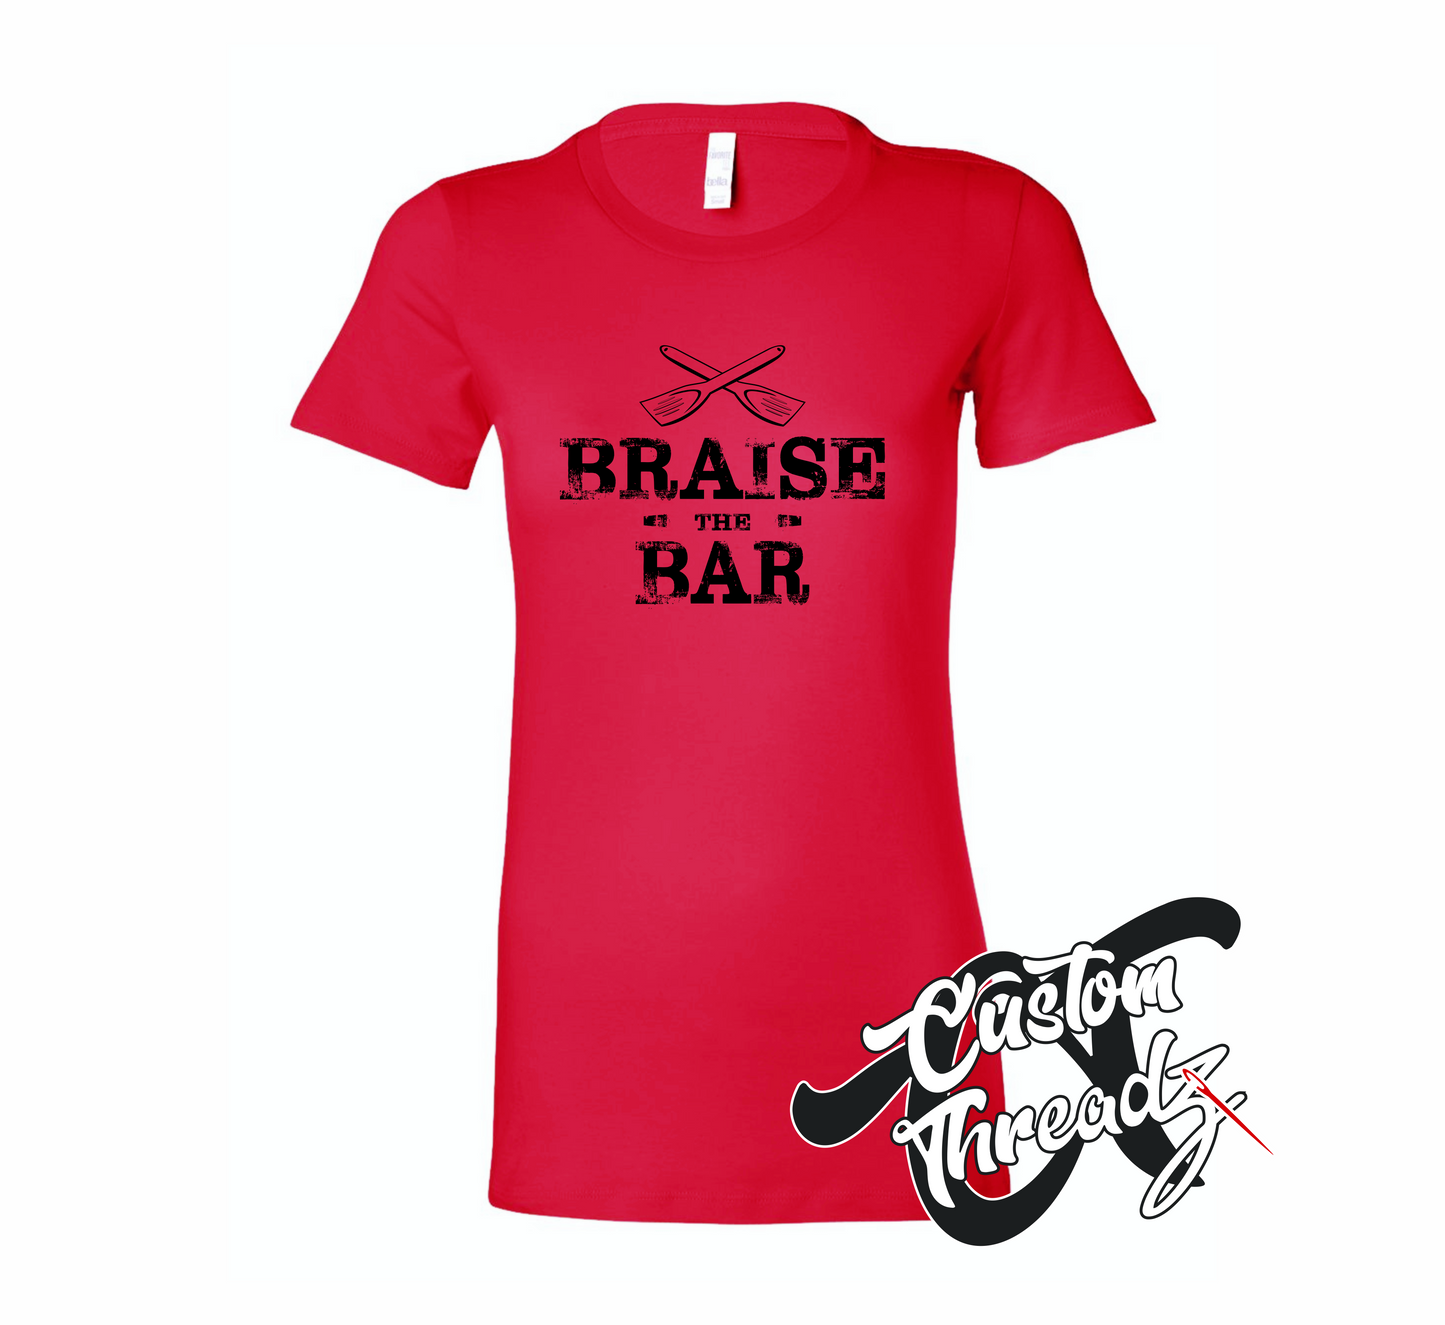 red womens tee with braise the bar summertime DTG printed design